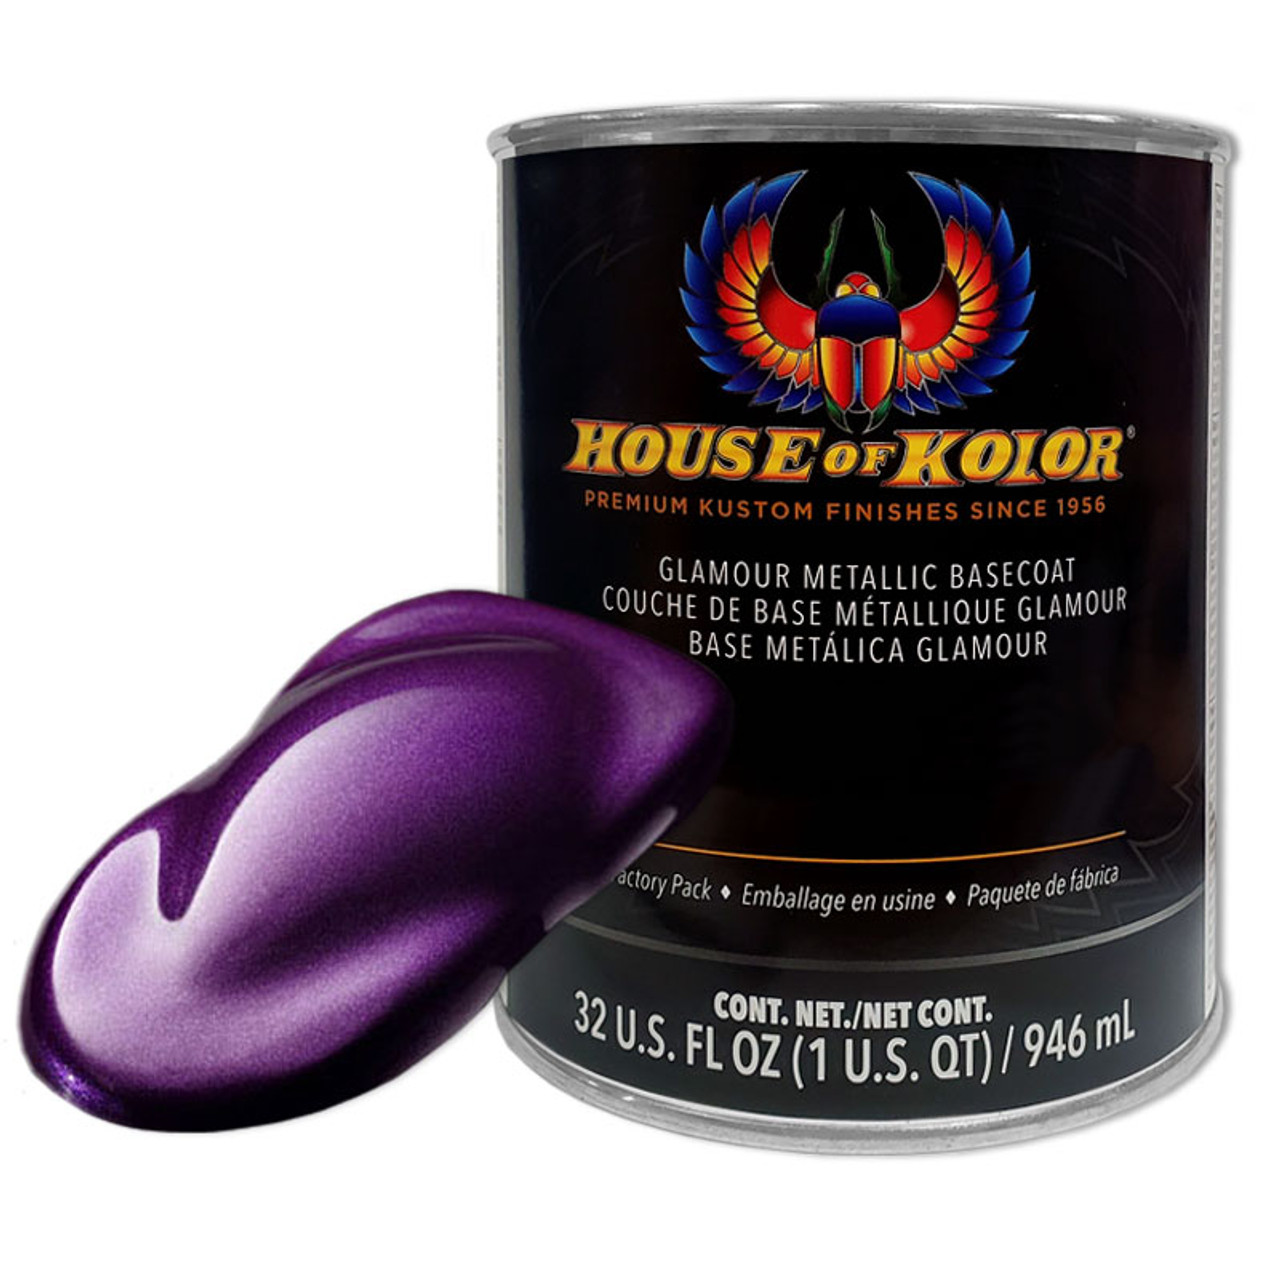 House of Kolor Automotive Paints and Coatings in Oils and Fluids 